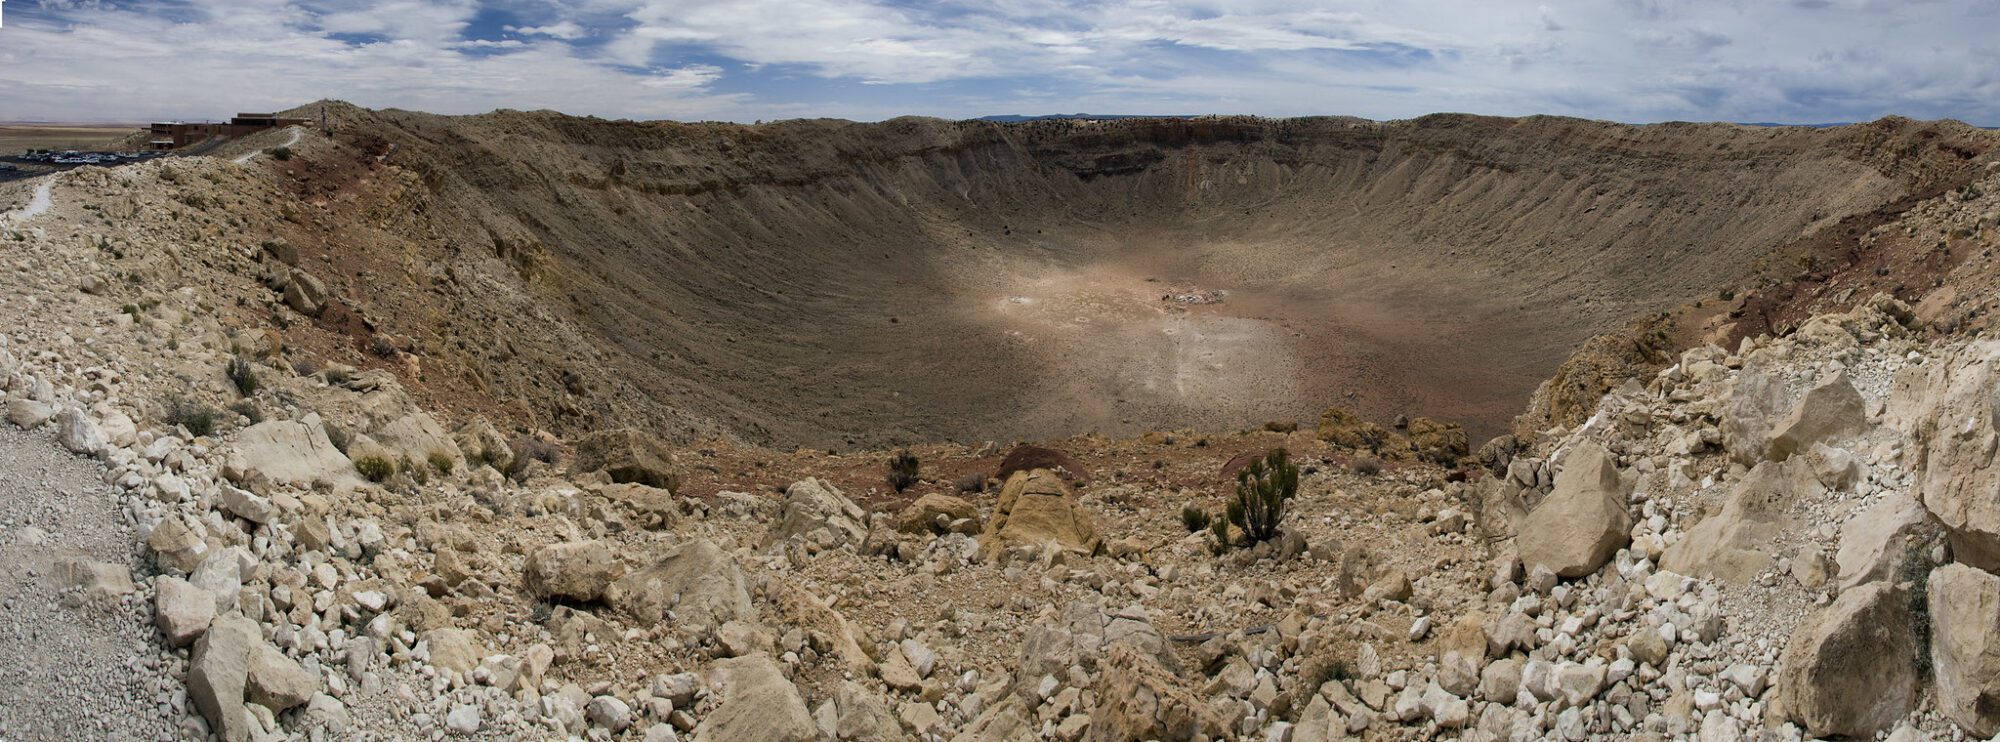 Exterior panoramic image of the Meteor Crater in Arizona.